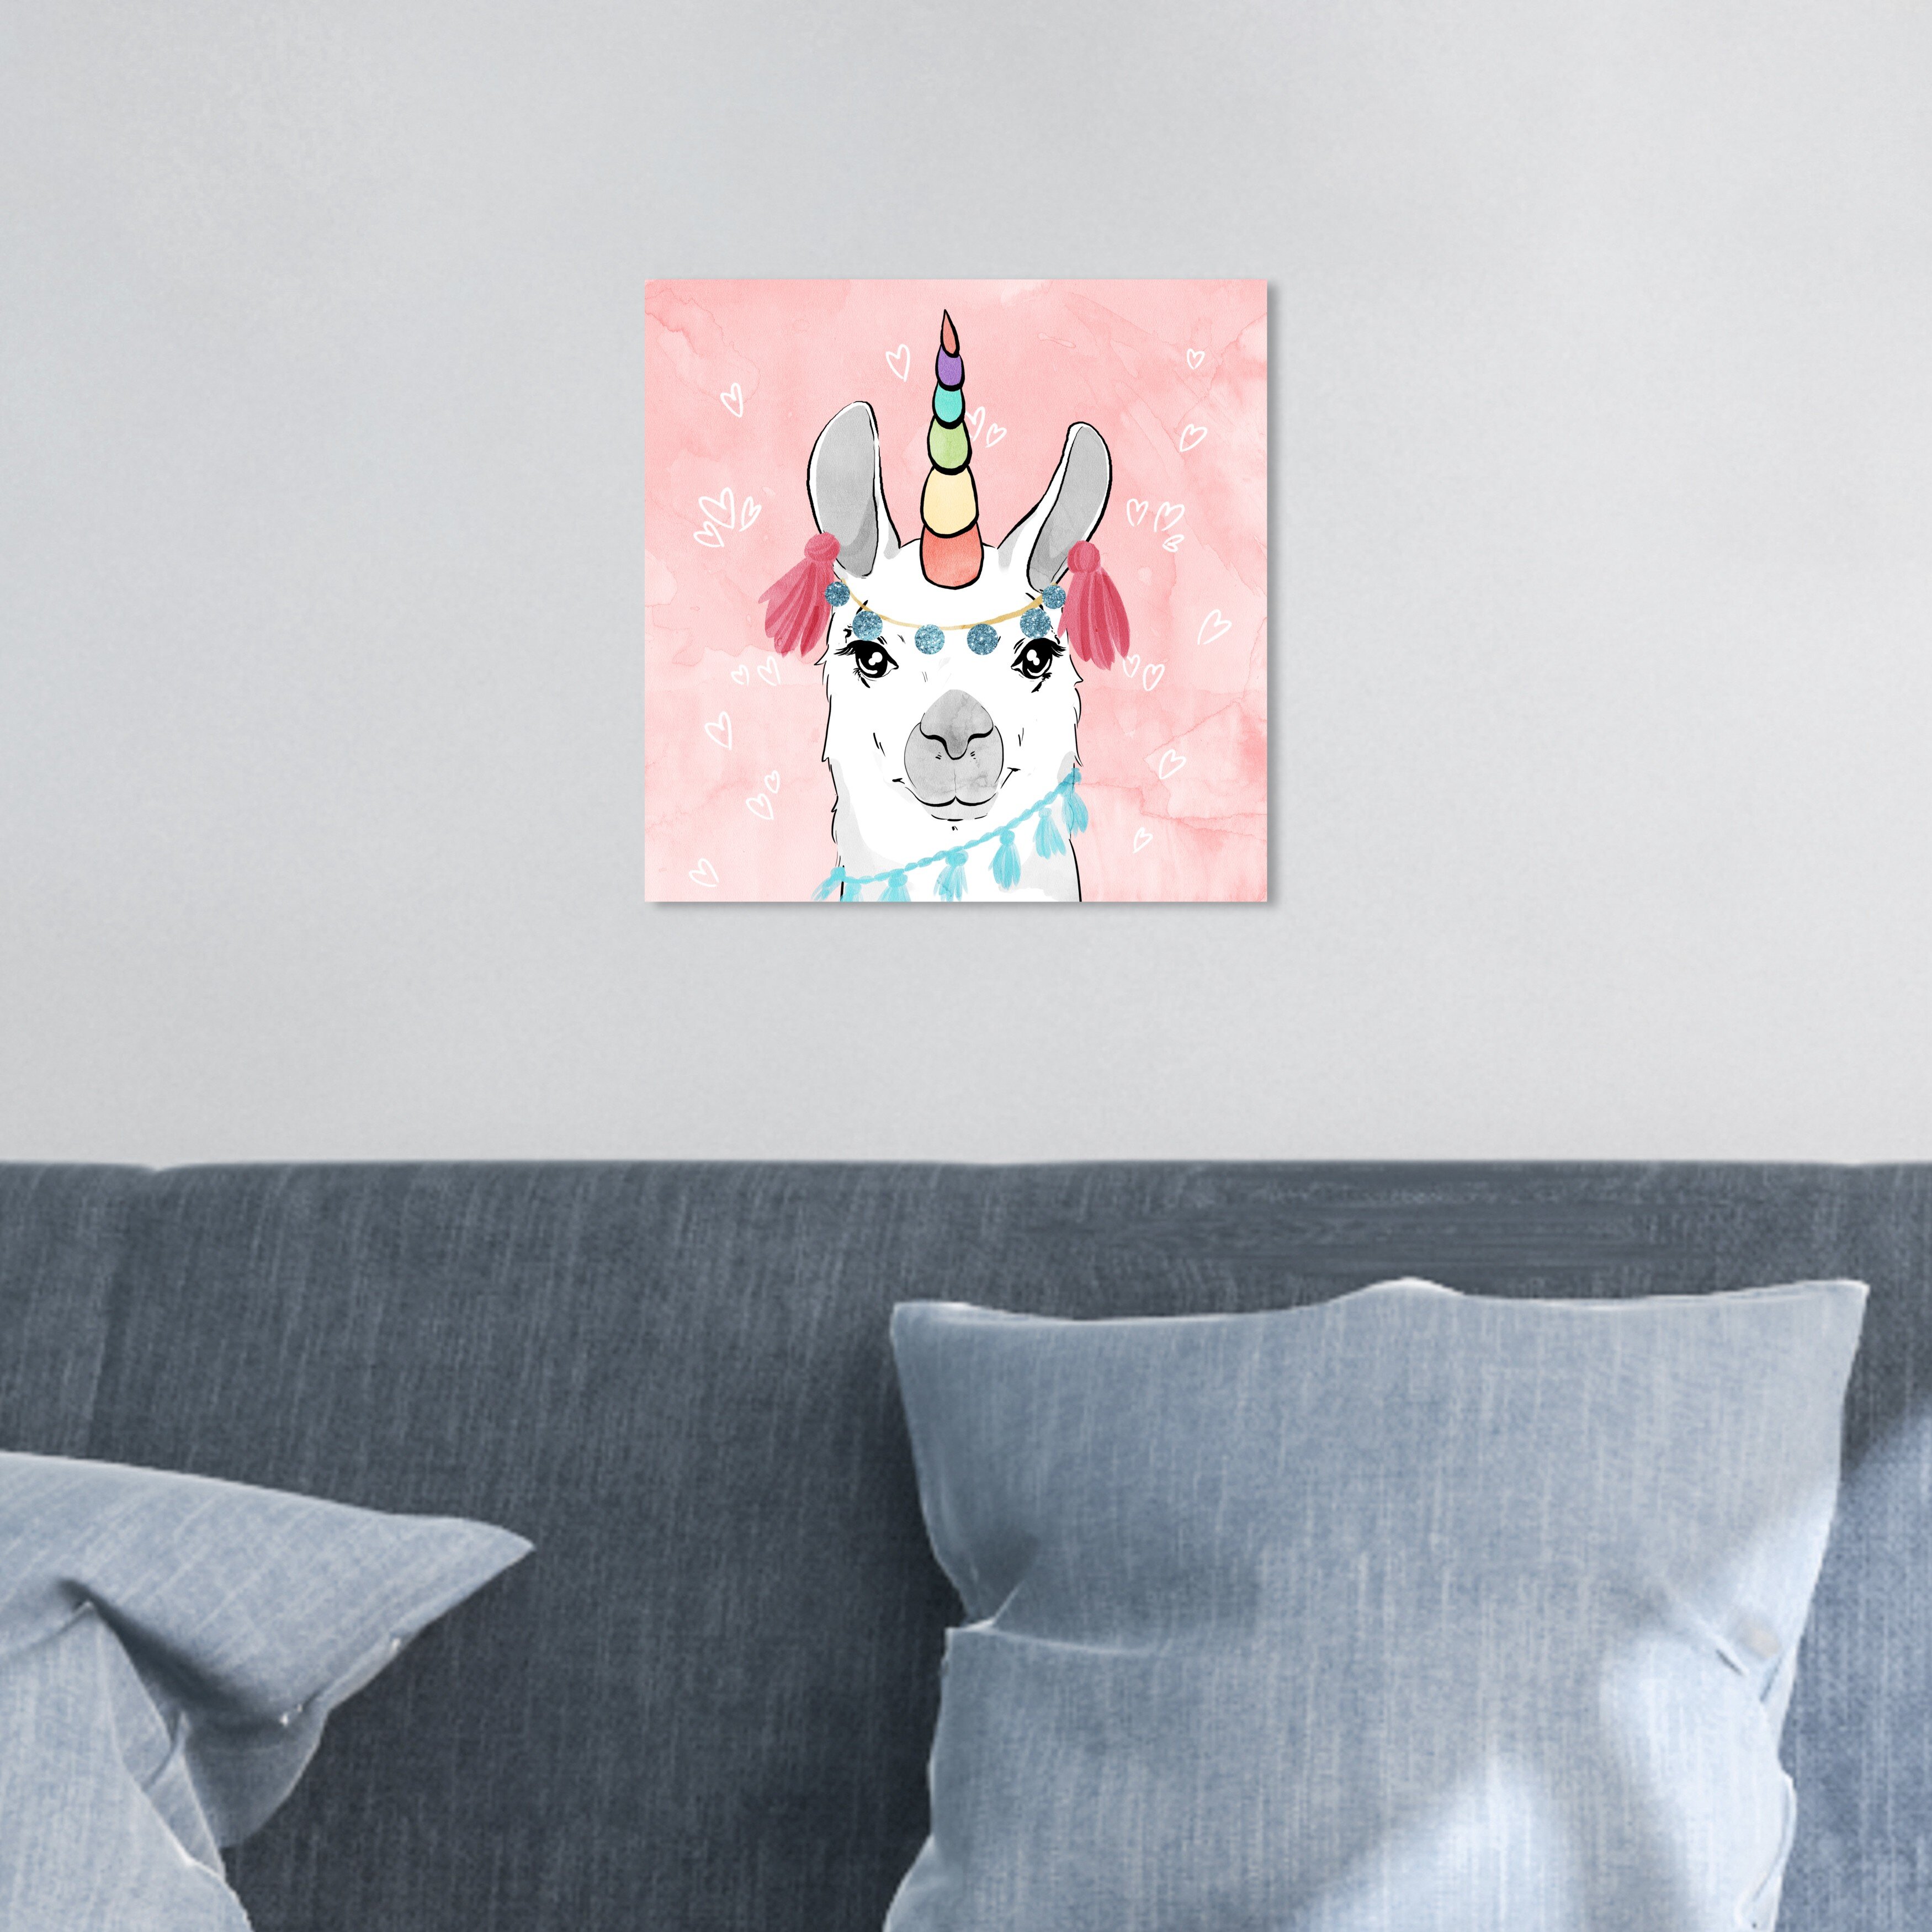 Olivia's Easel Lovely Unicorn On Canvas Painting